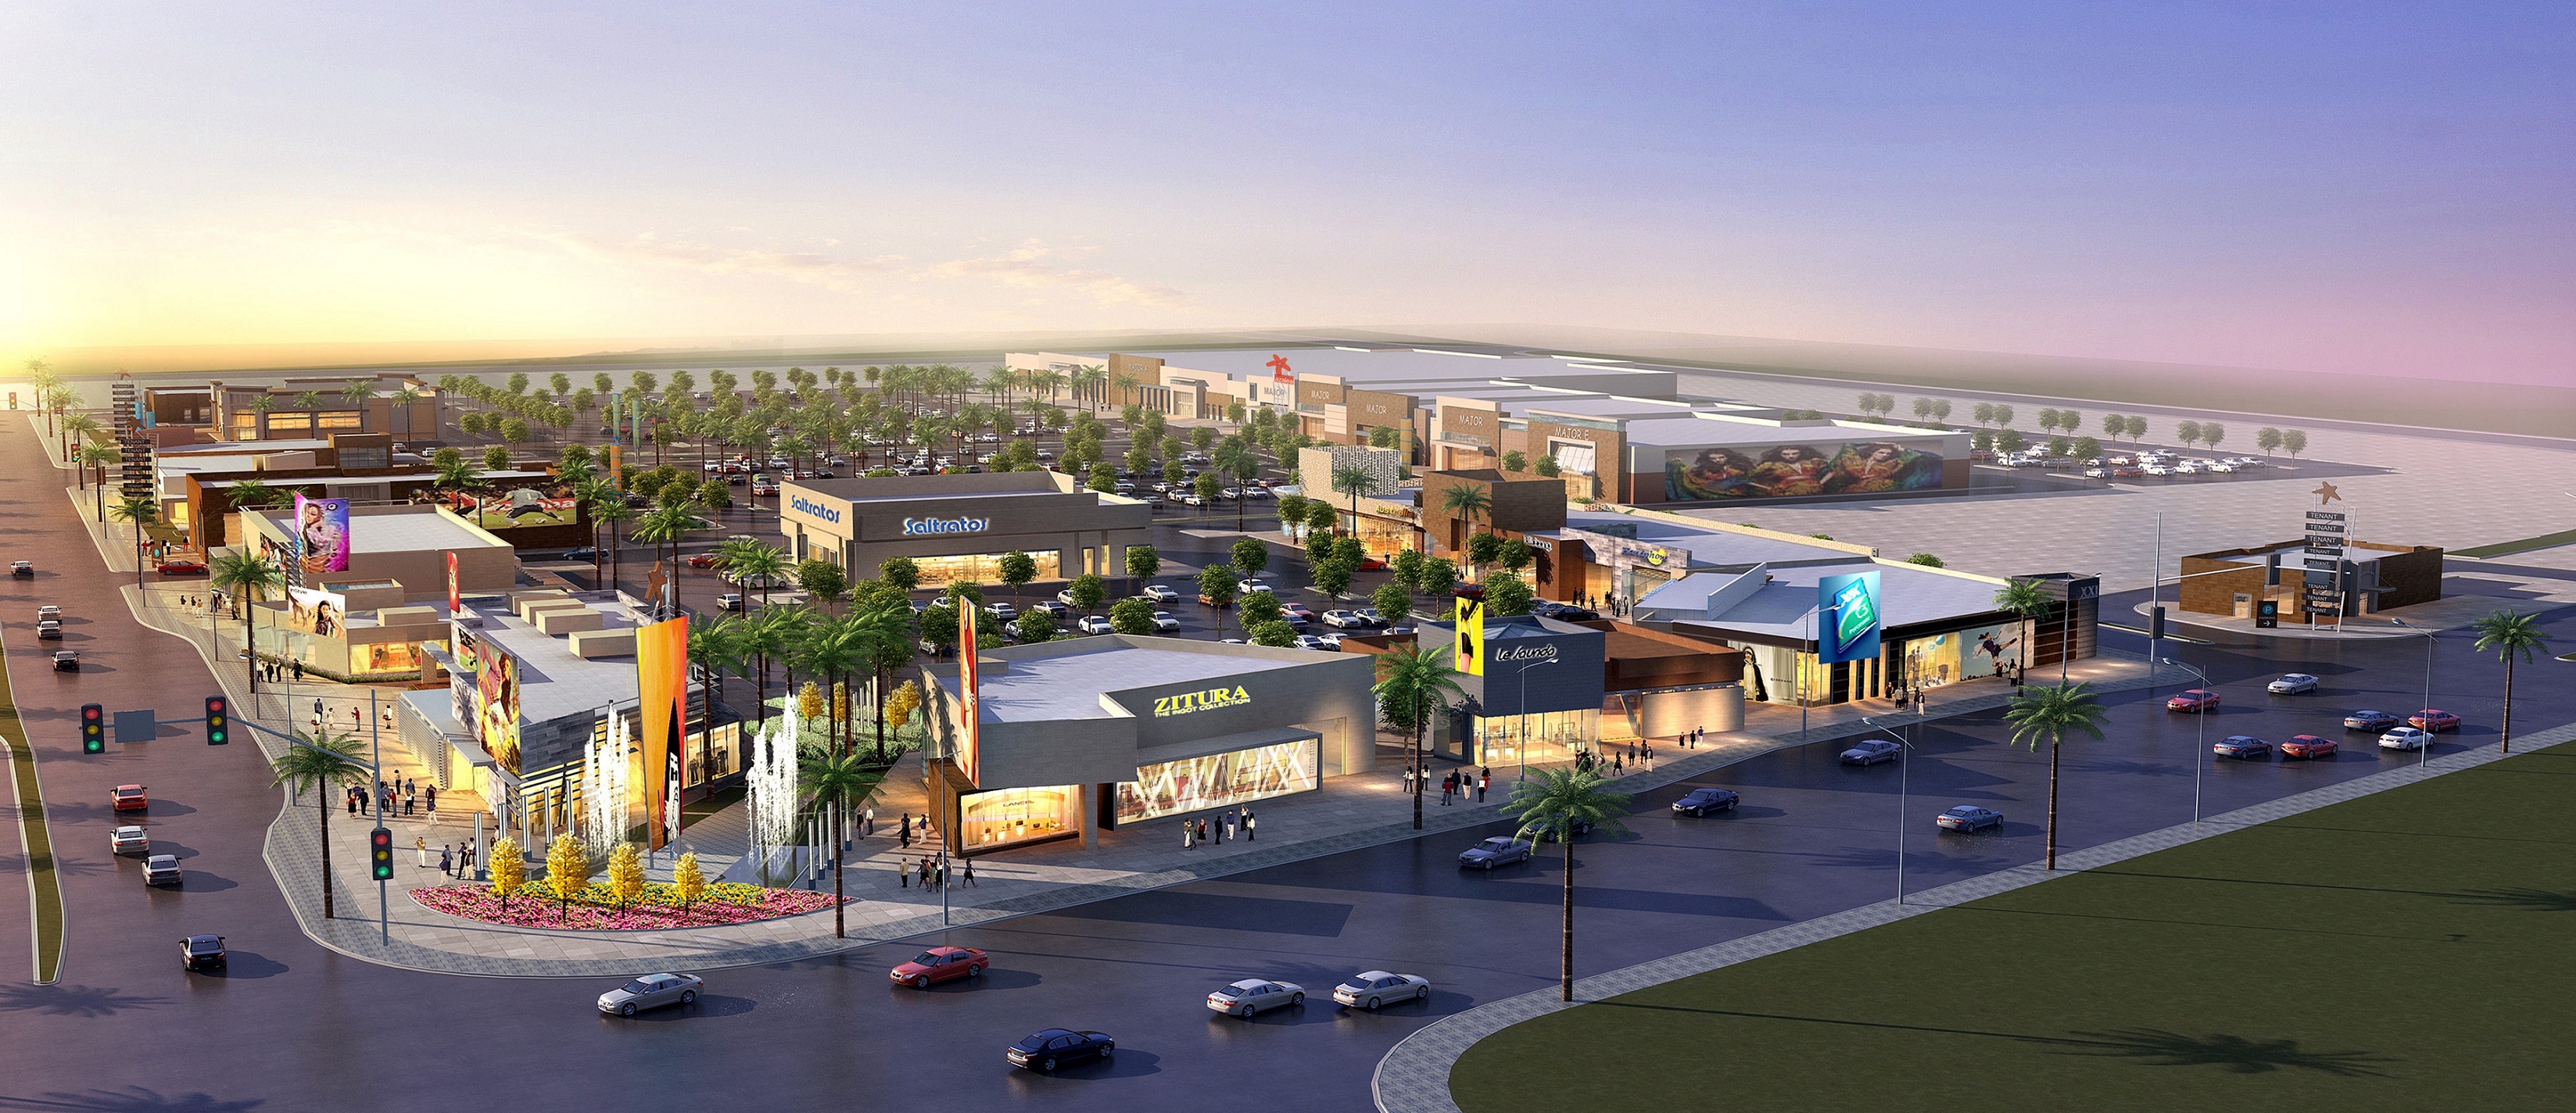 City of South Gate Receives 5.1 Million From Shopping Center Developer